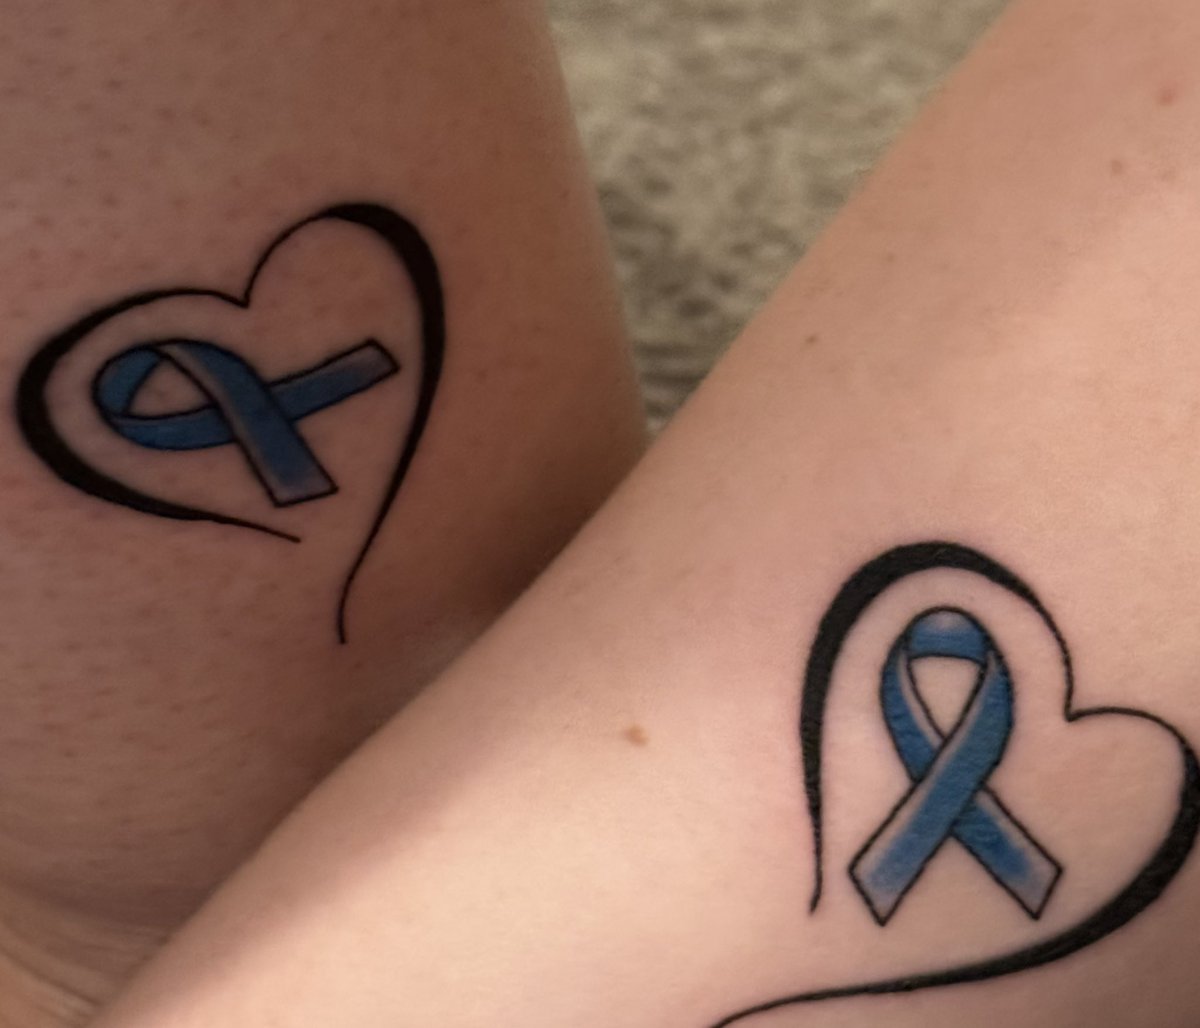 Mommy daughter date last night. 
#coloncancerawareness